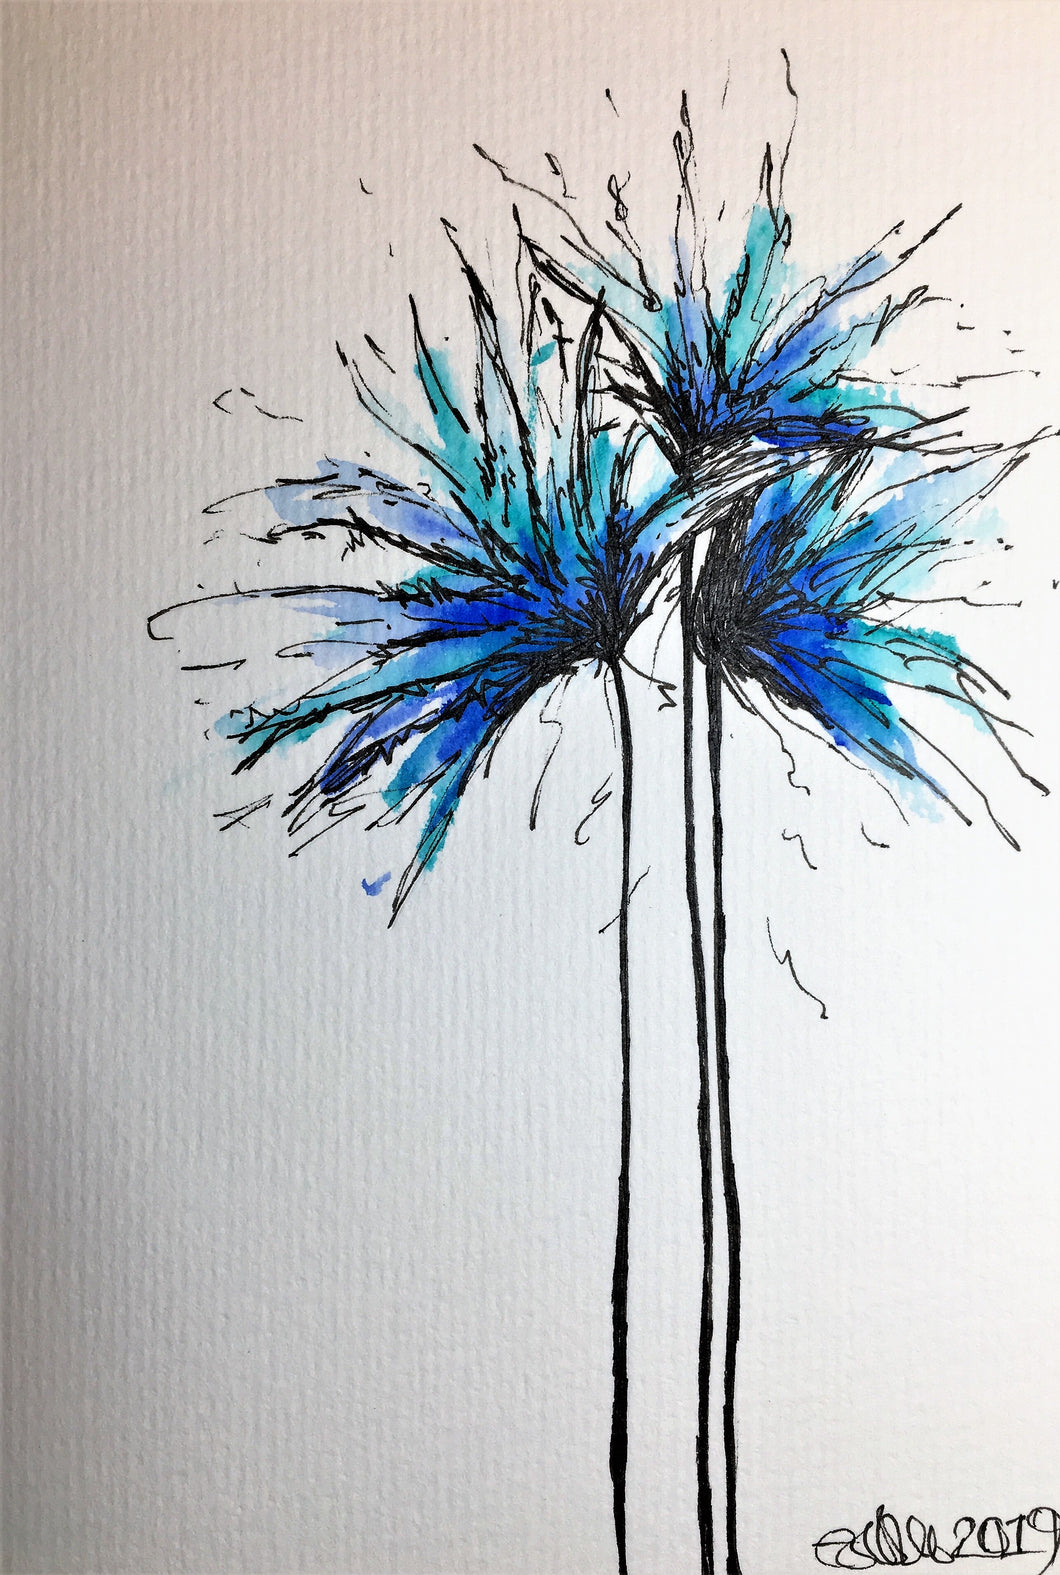 Hand-painted greeting card - Blue, Jade, Turquoise spiky flowers design - eDgE dEsiGn London